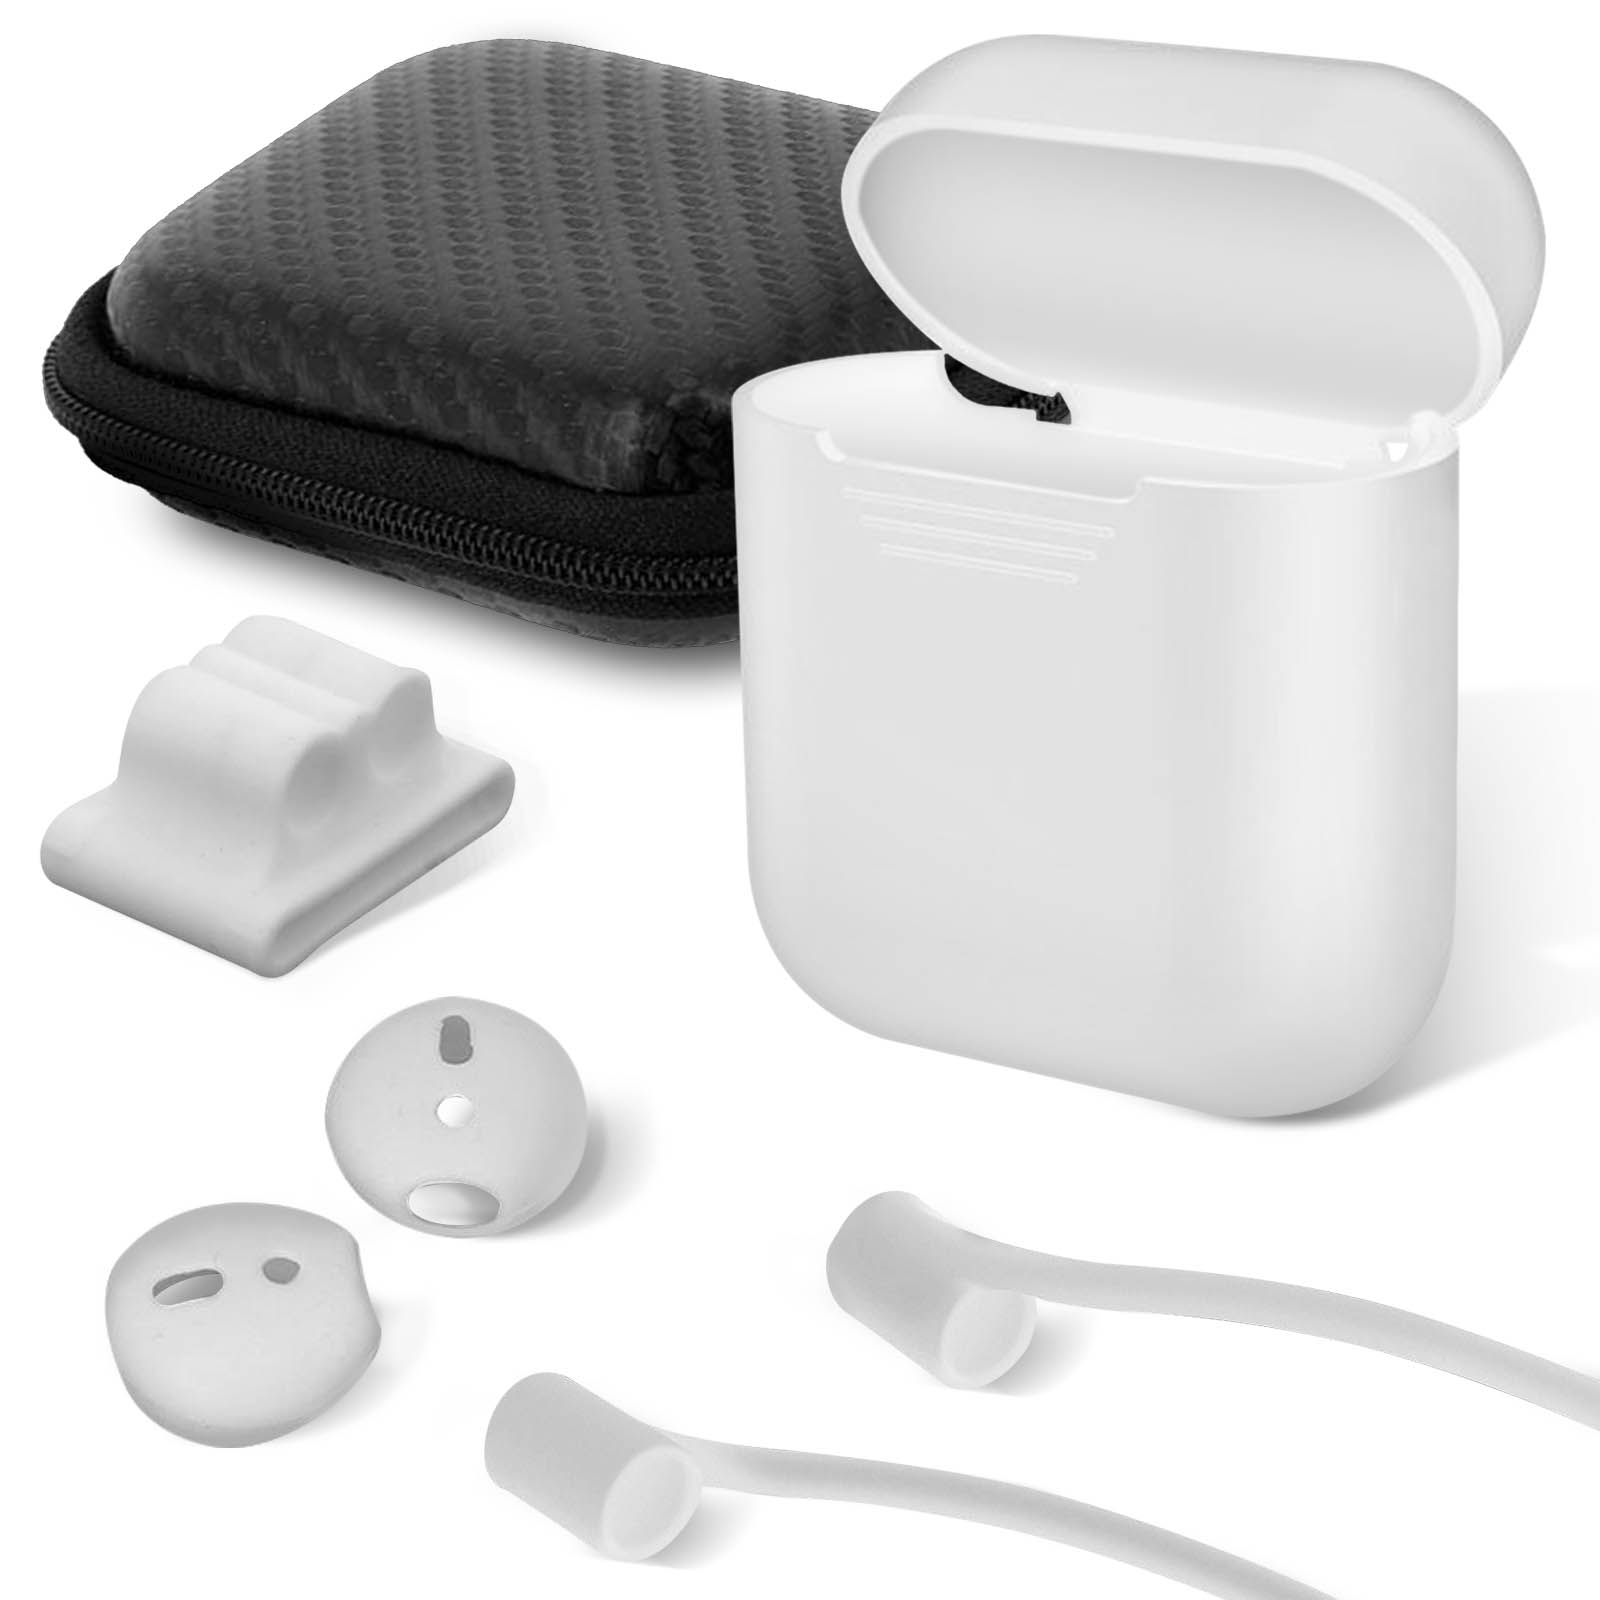 Hülle, Cover, Set: Weiß 5-in-1 Tasche, Apple, AVIZAR AirPods, AirPods Full Schlaufe, Apple